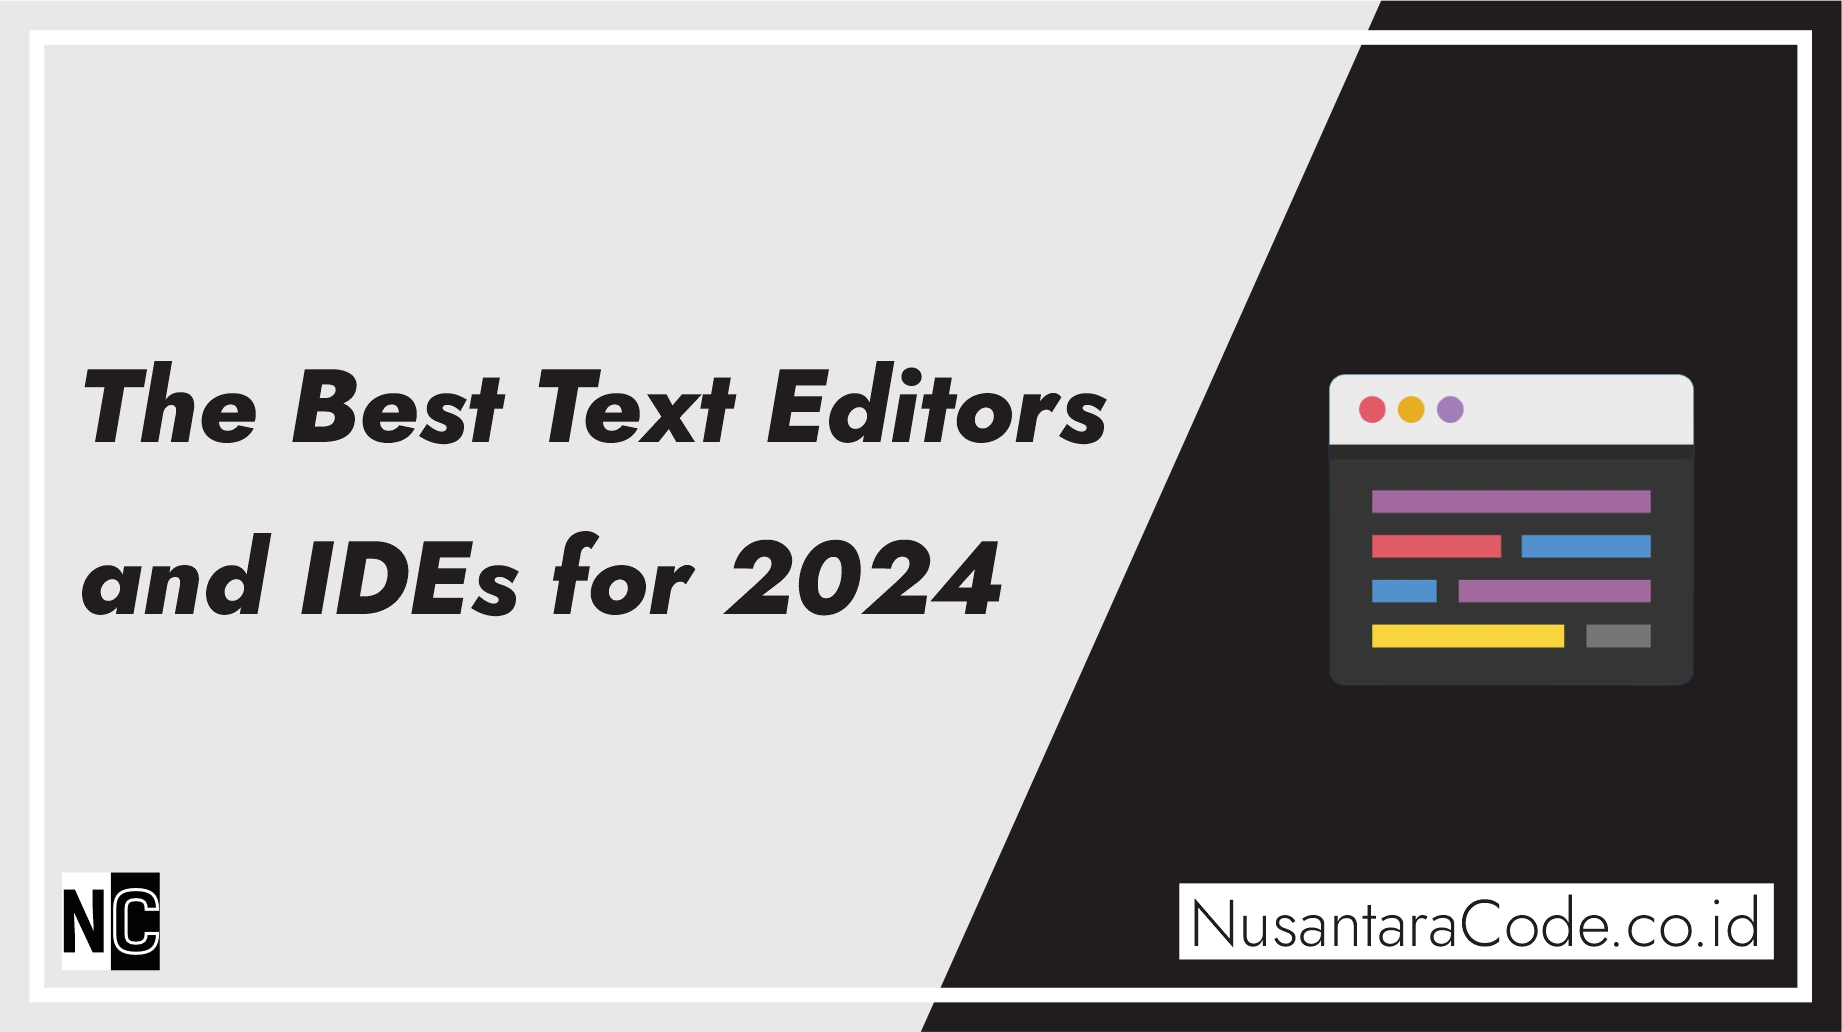 The Best Text Editors and IDEs for 2024